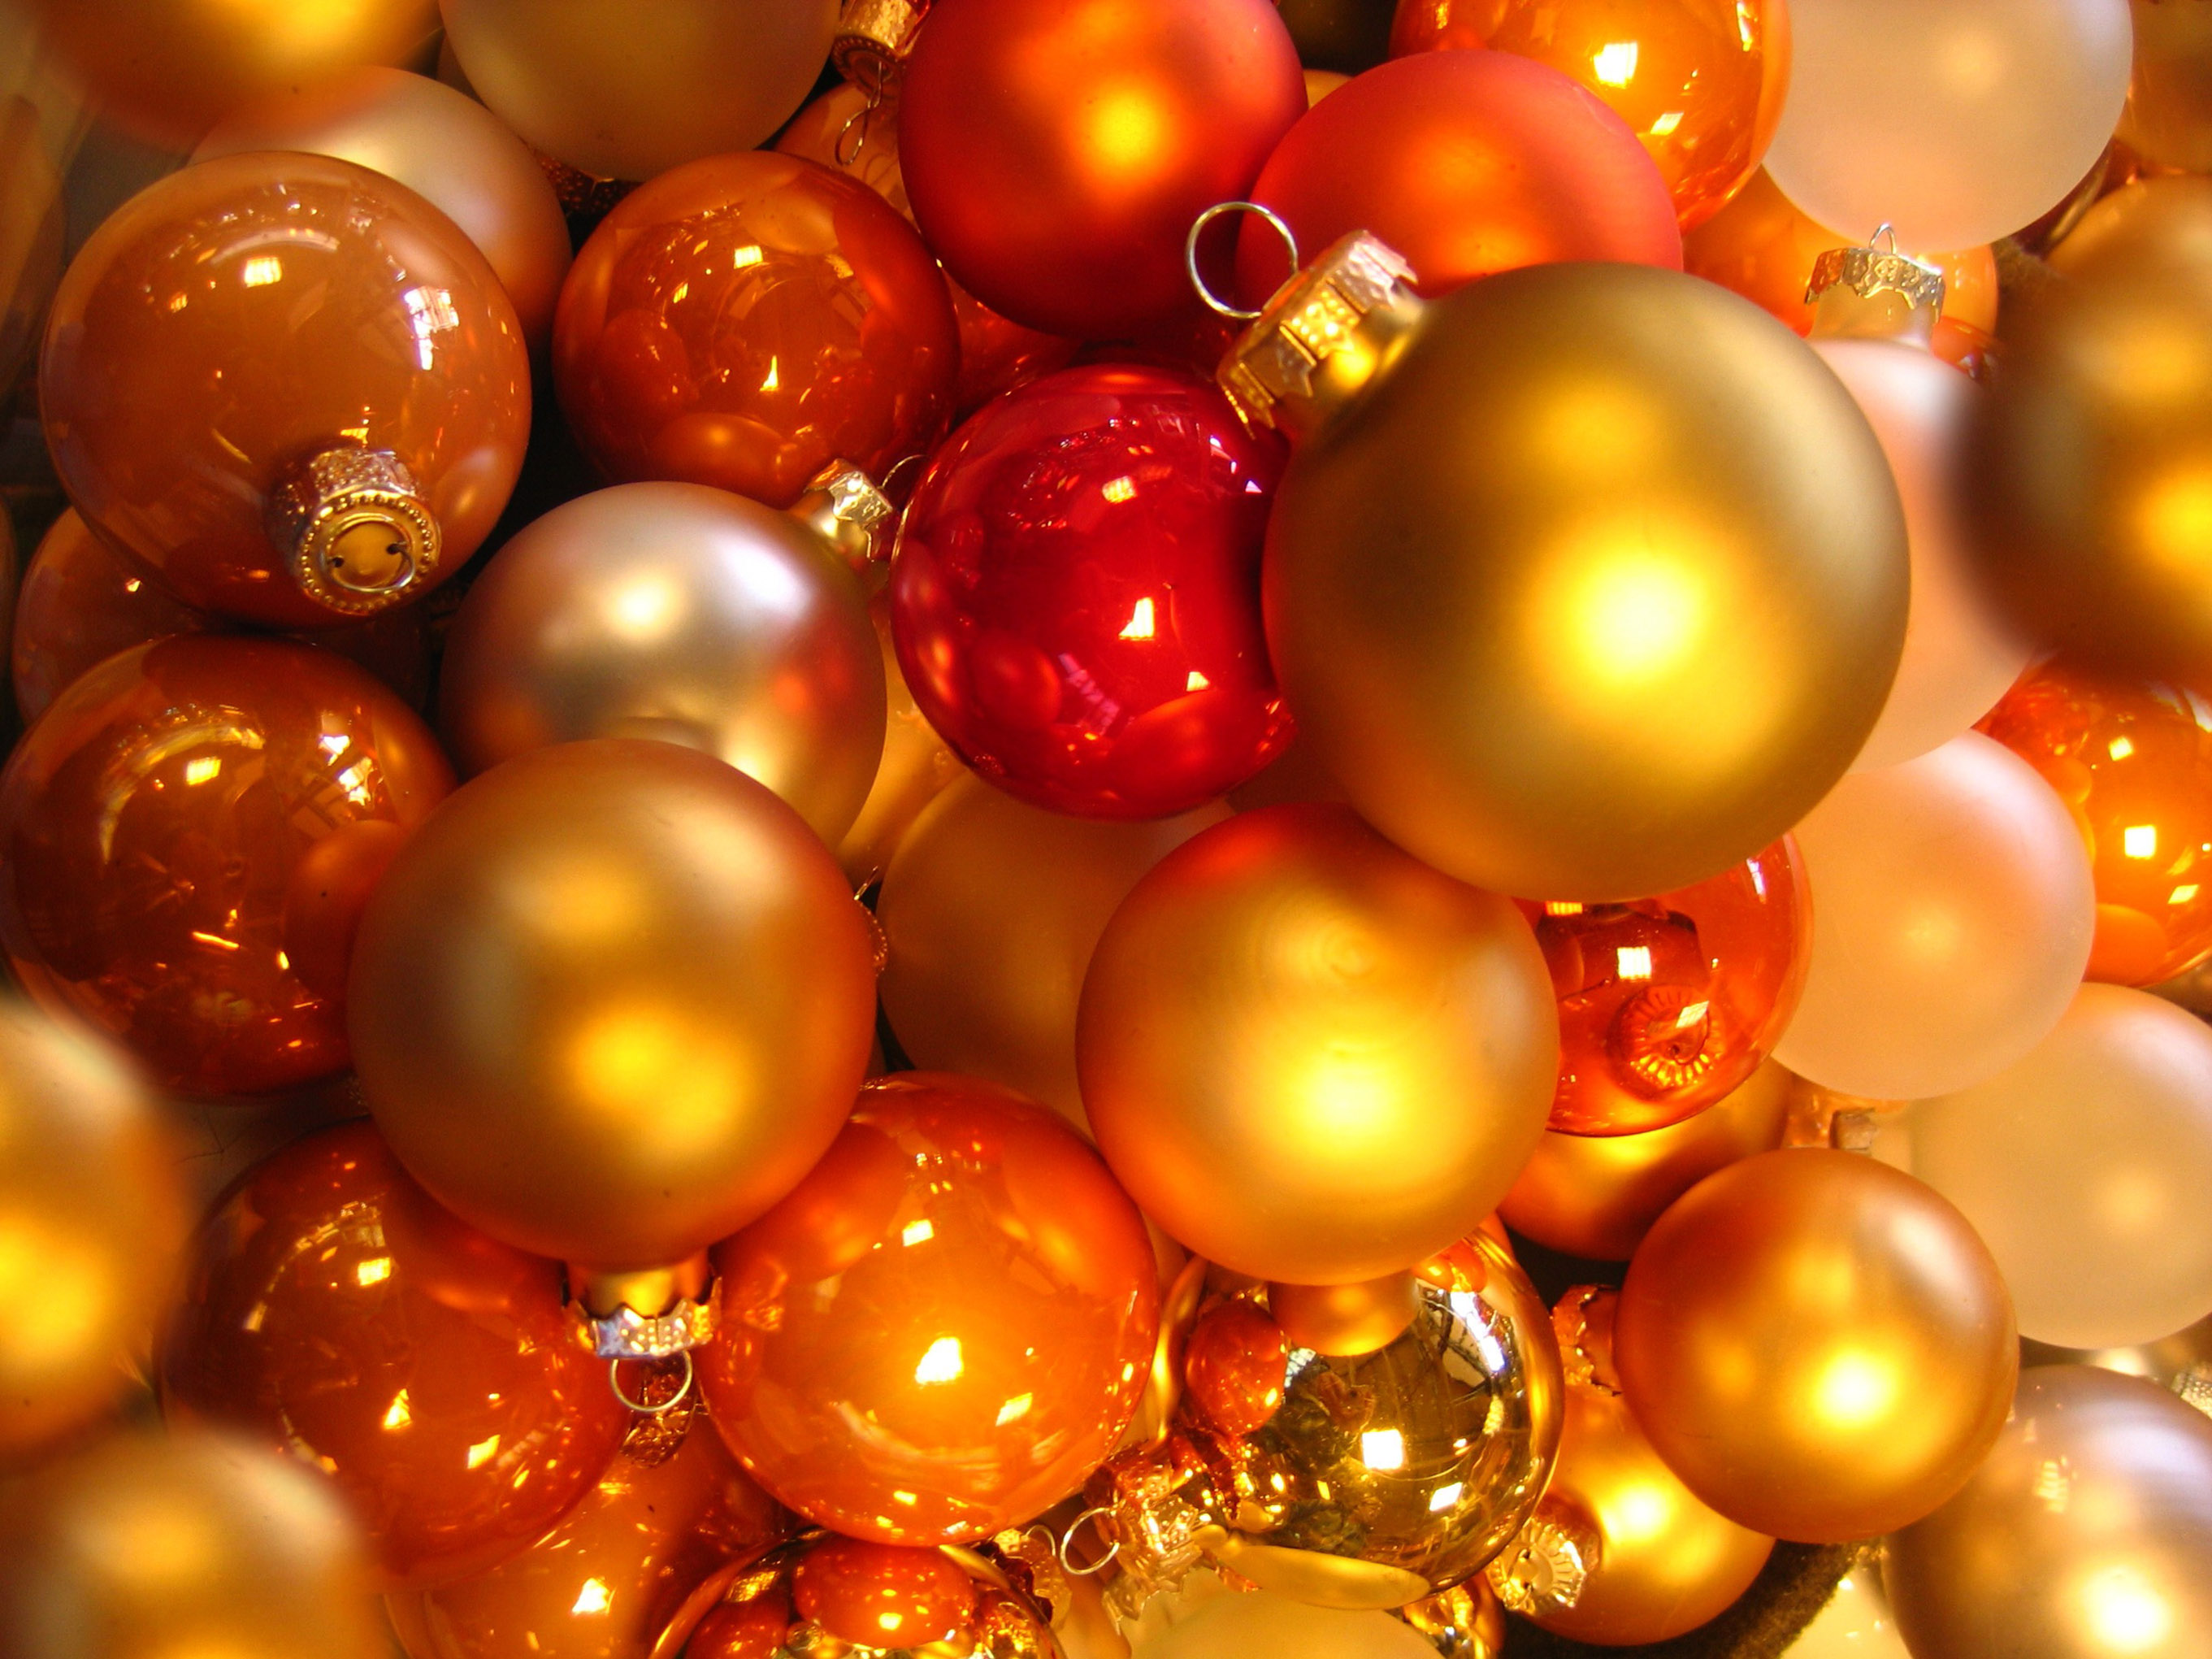 Great Ball or Bauble Themed Free Christmas Wallpaper or Christmas Background Image